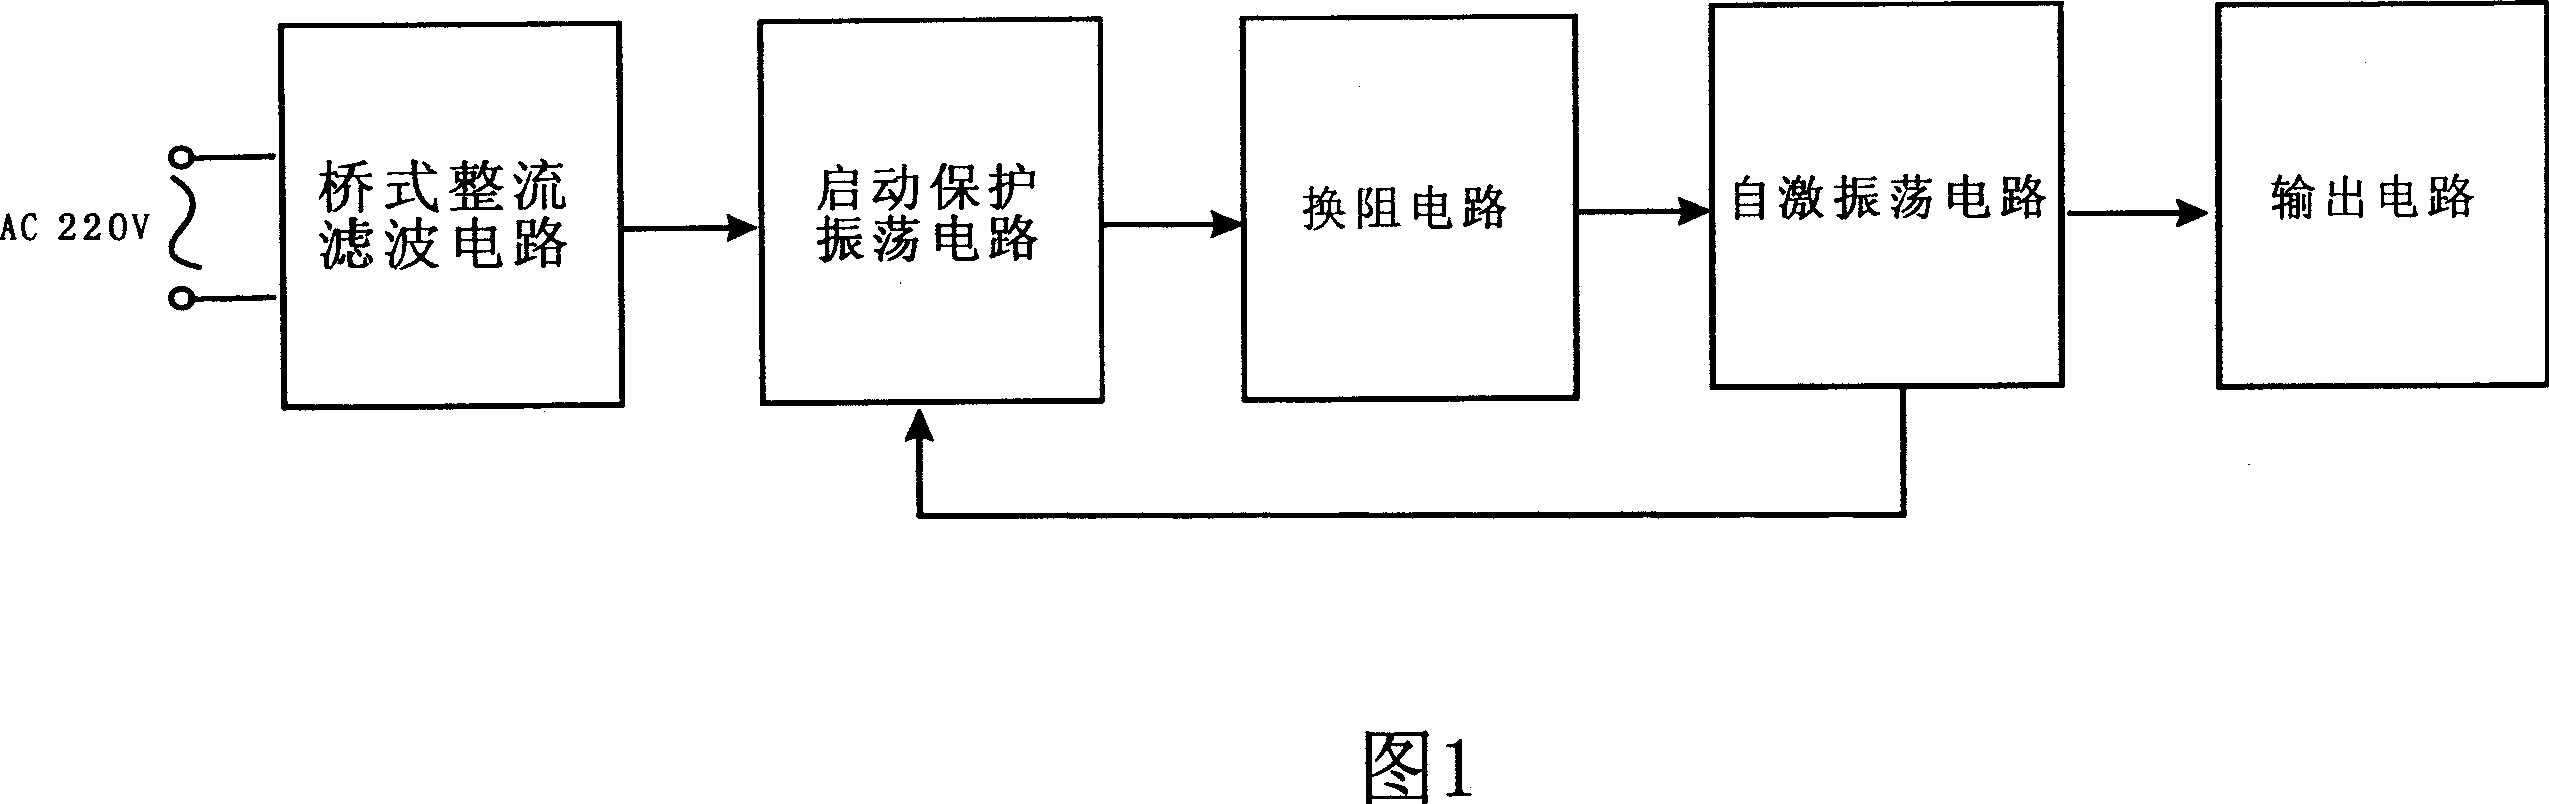 Power supply processing circuit